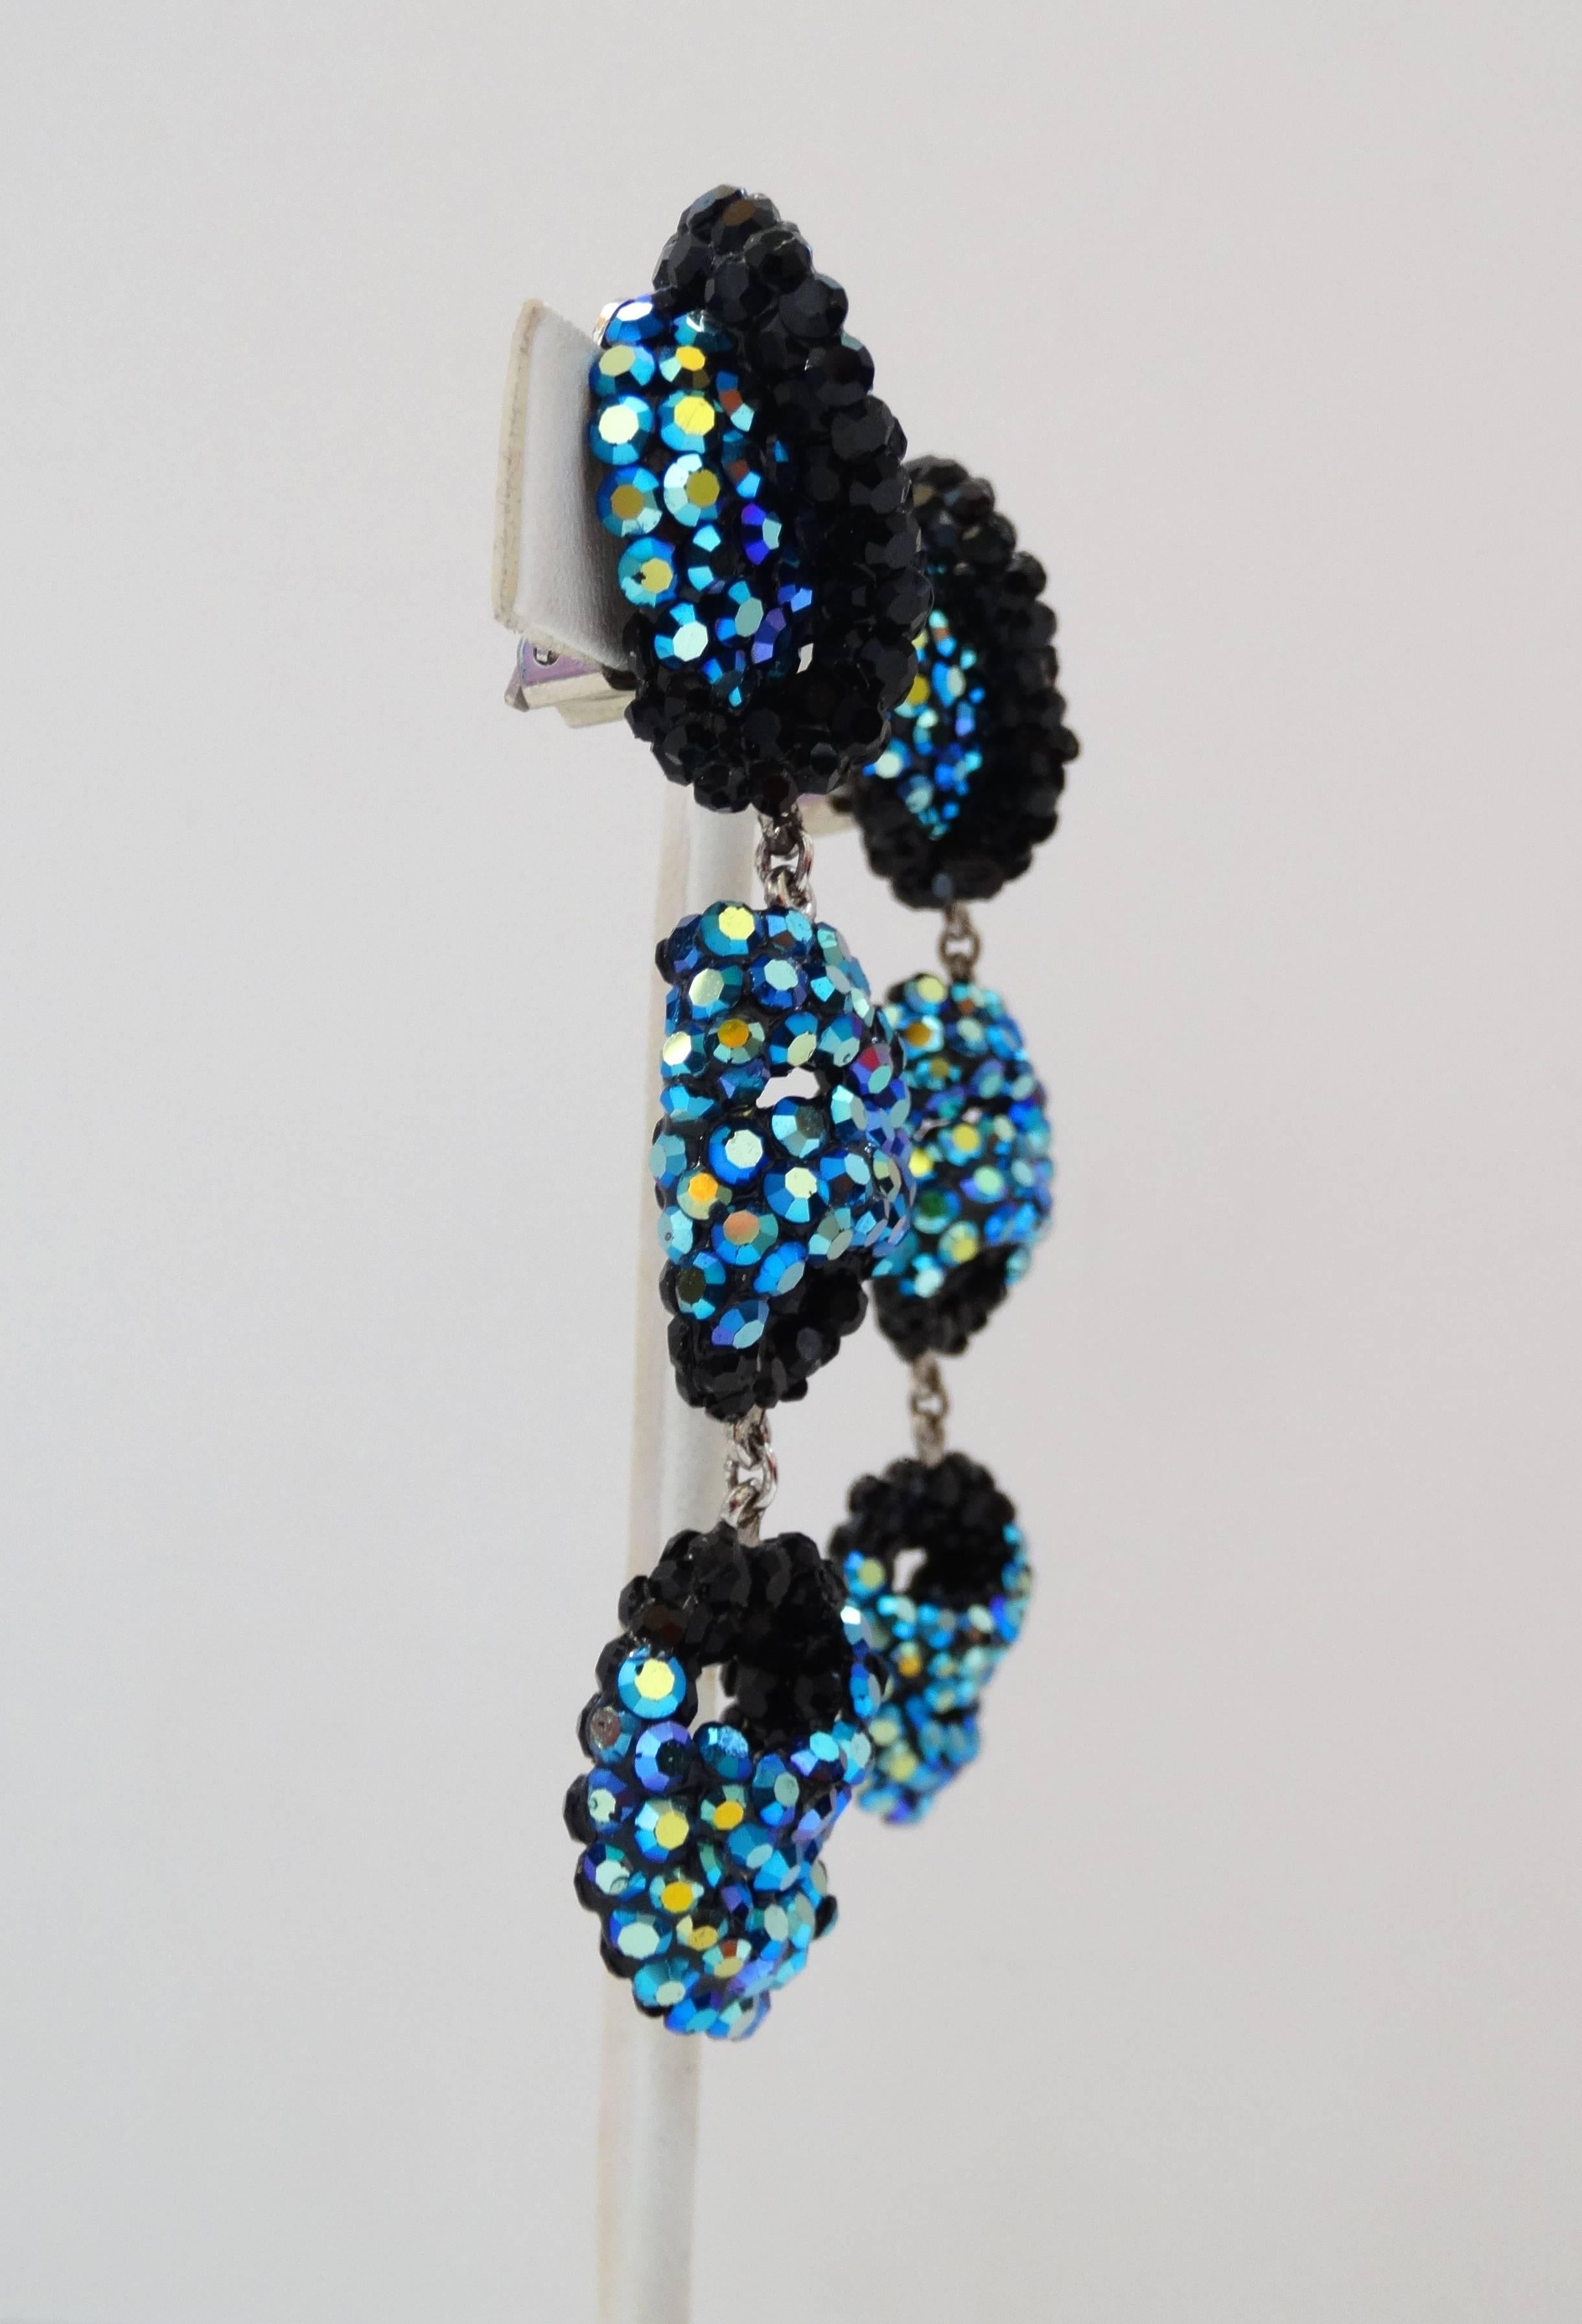 The most dazzling pair of avant garde, abstract earrings for your next cocktail attire occasion! Encrusted front and back with blue and black rhinestones throughout, three charms all attached with silver metal hardware. Clip on backs. Unsigned, but